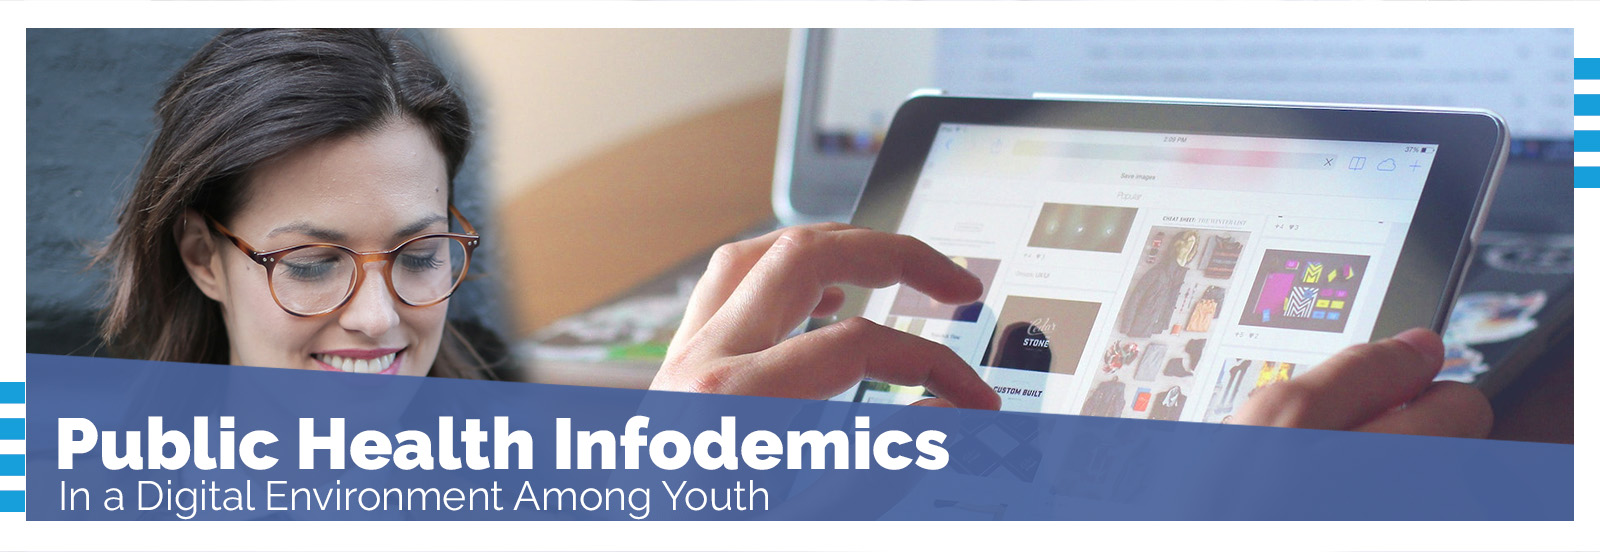 Public Health Infodemics in a Digital Environment Among Youth